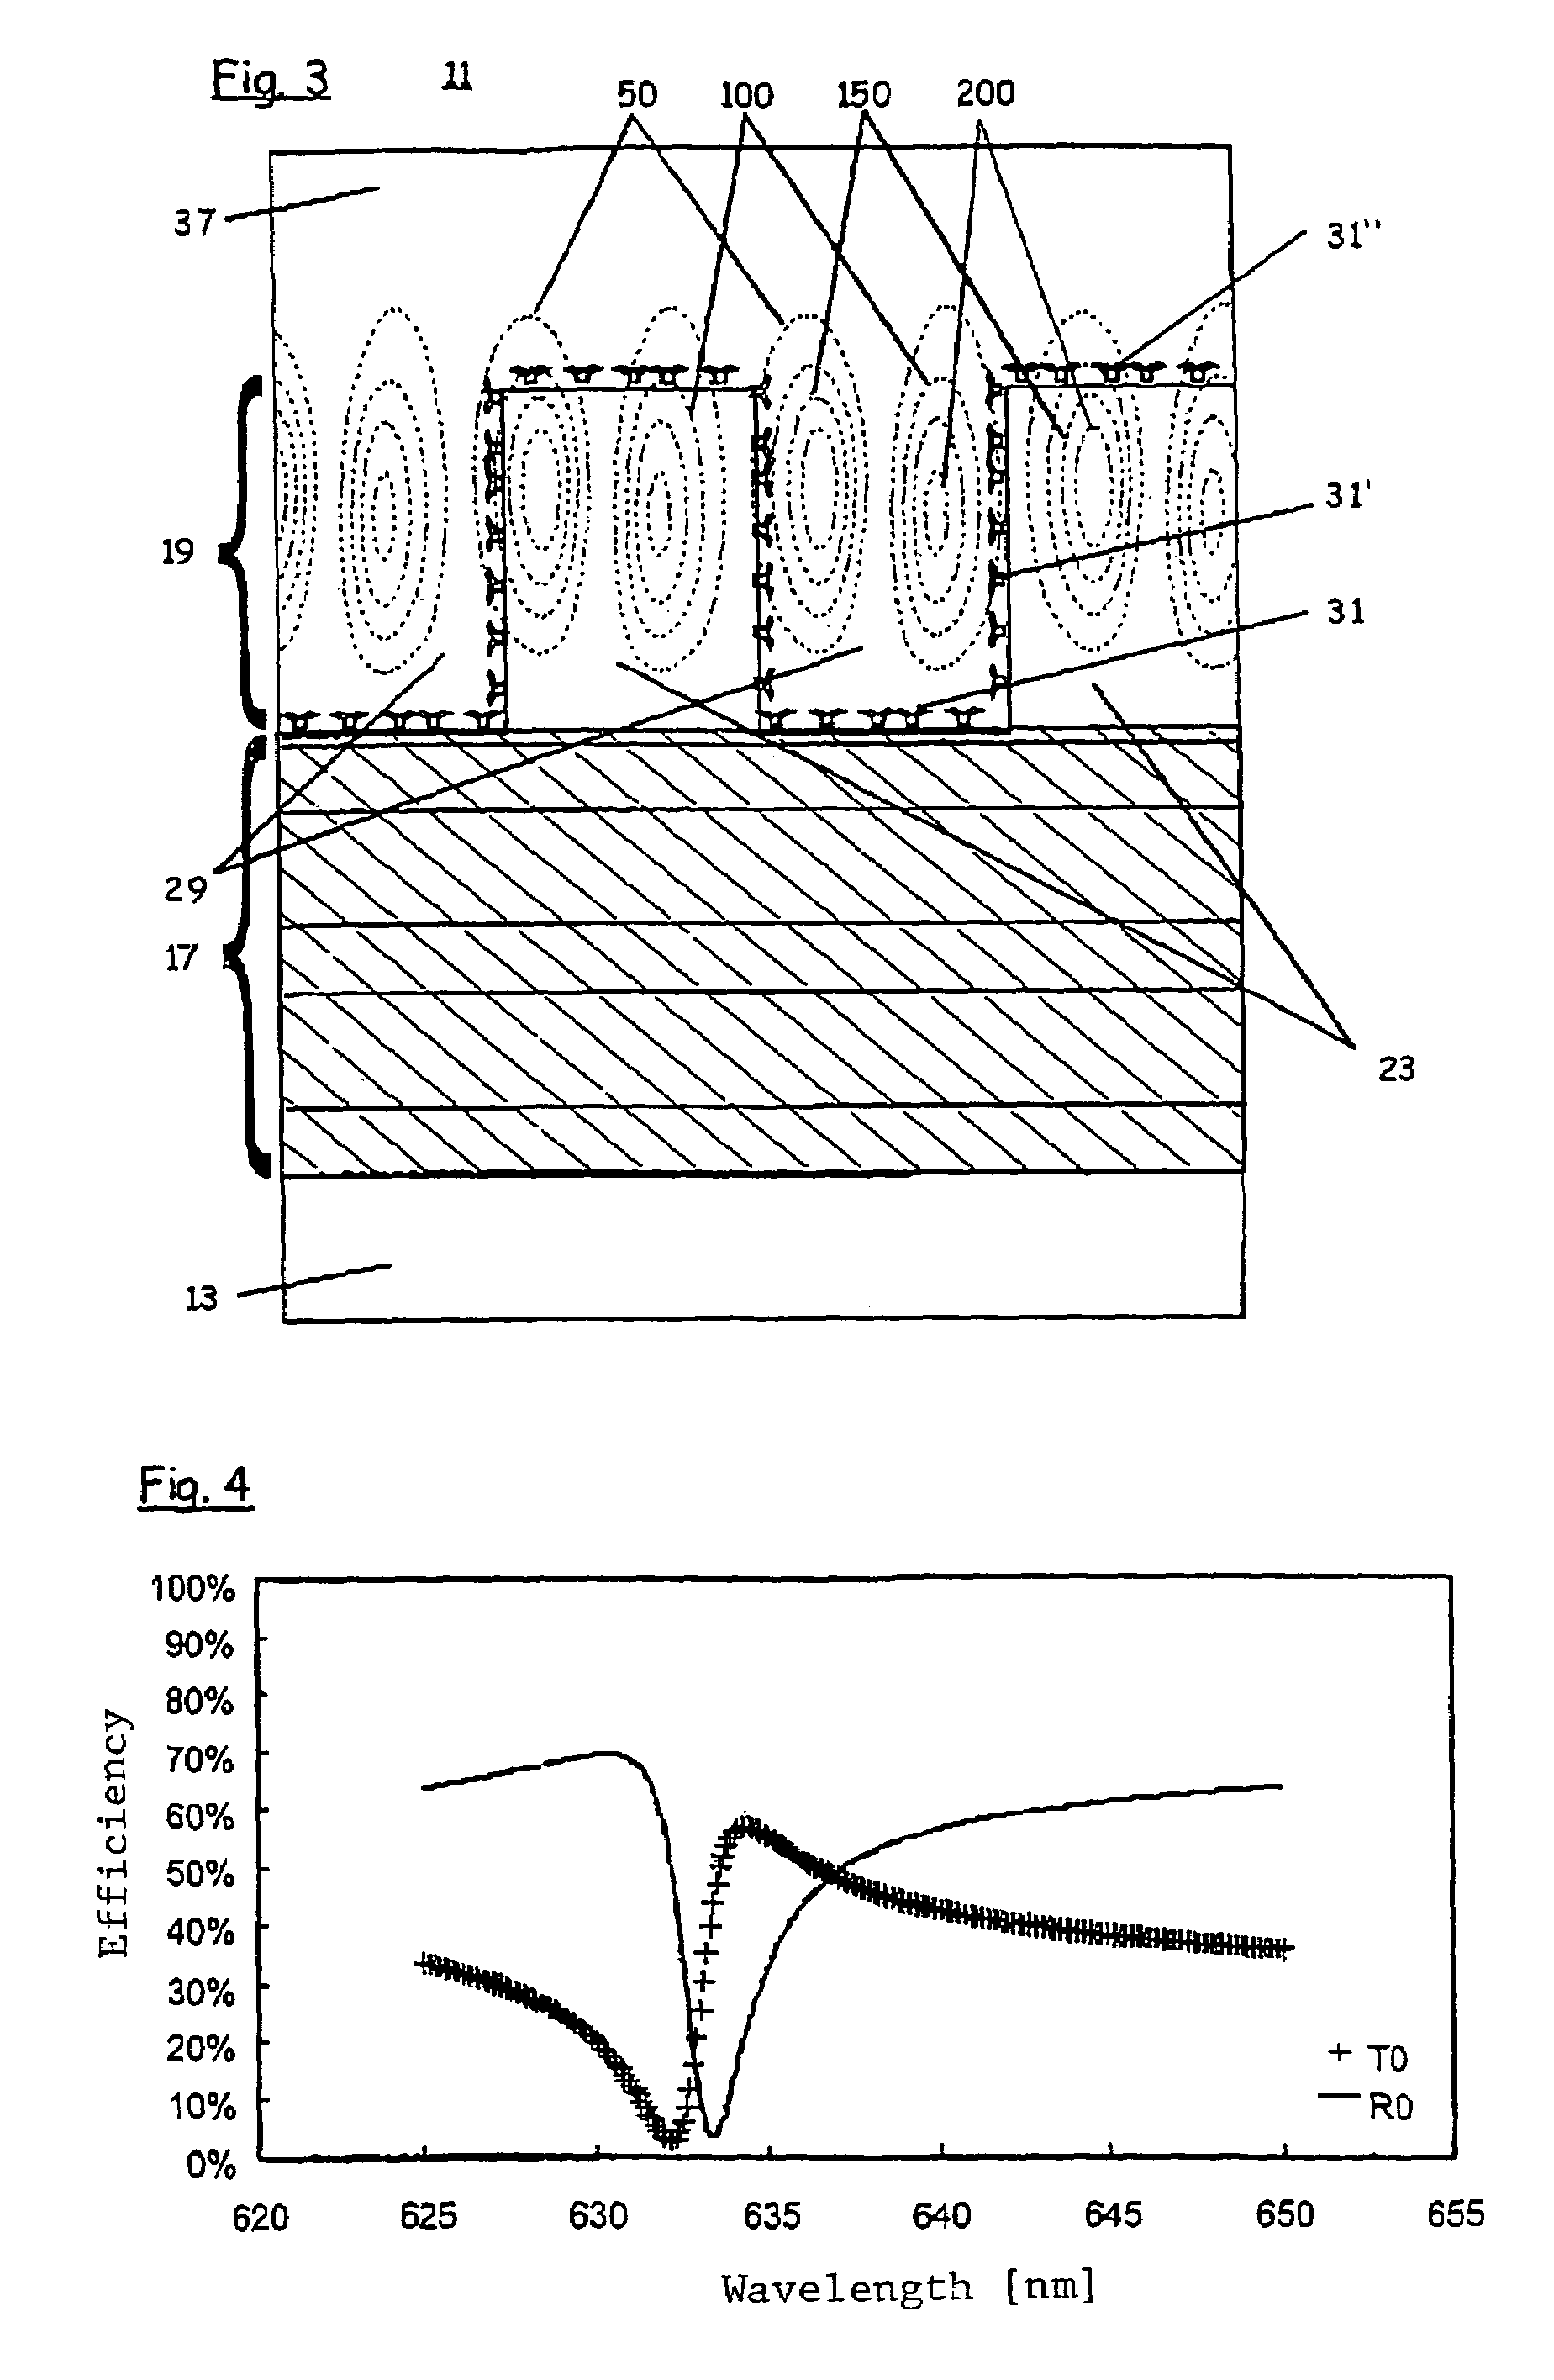 Method for generating electromagnetic field distributions